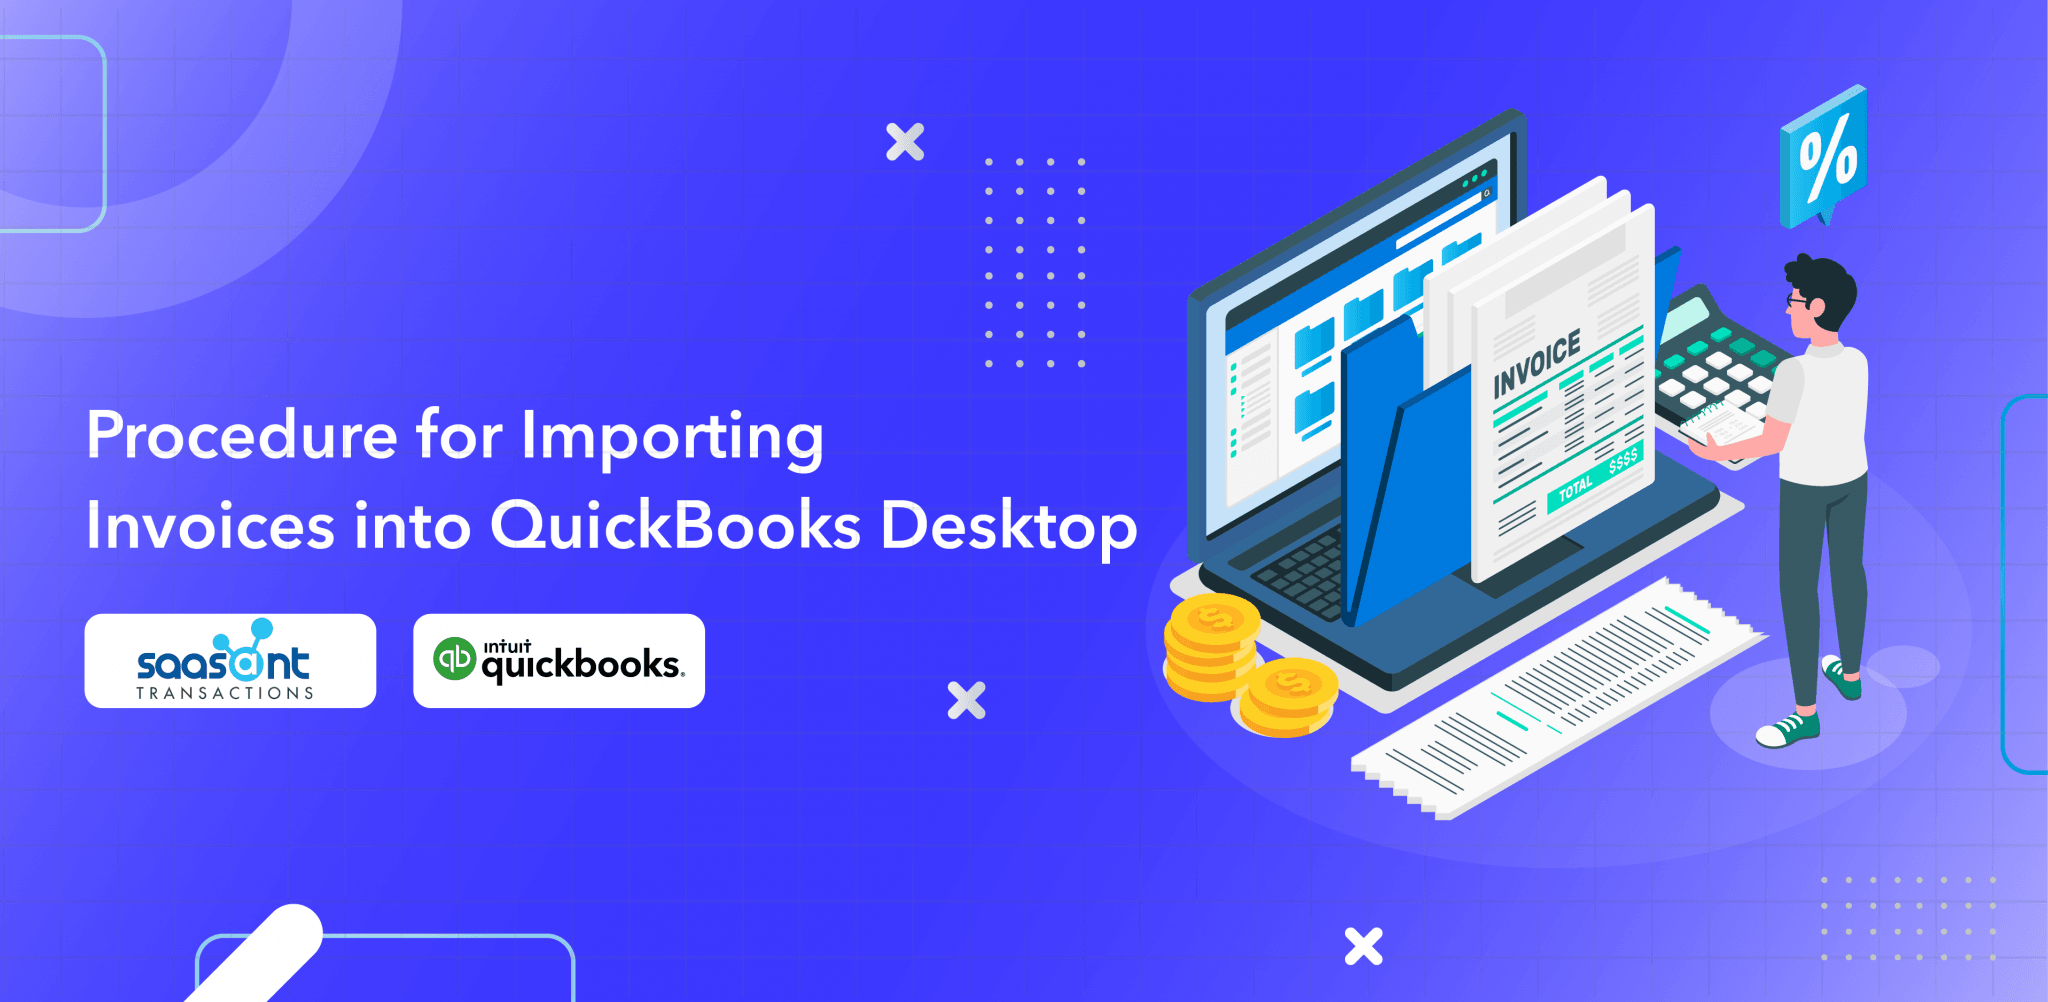 Procedure-for-Importing-Invoices-into-QuickBooks-Desktop-01-2048x1002.png